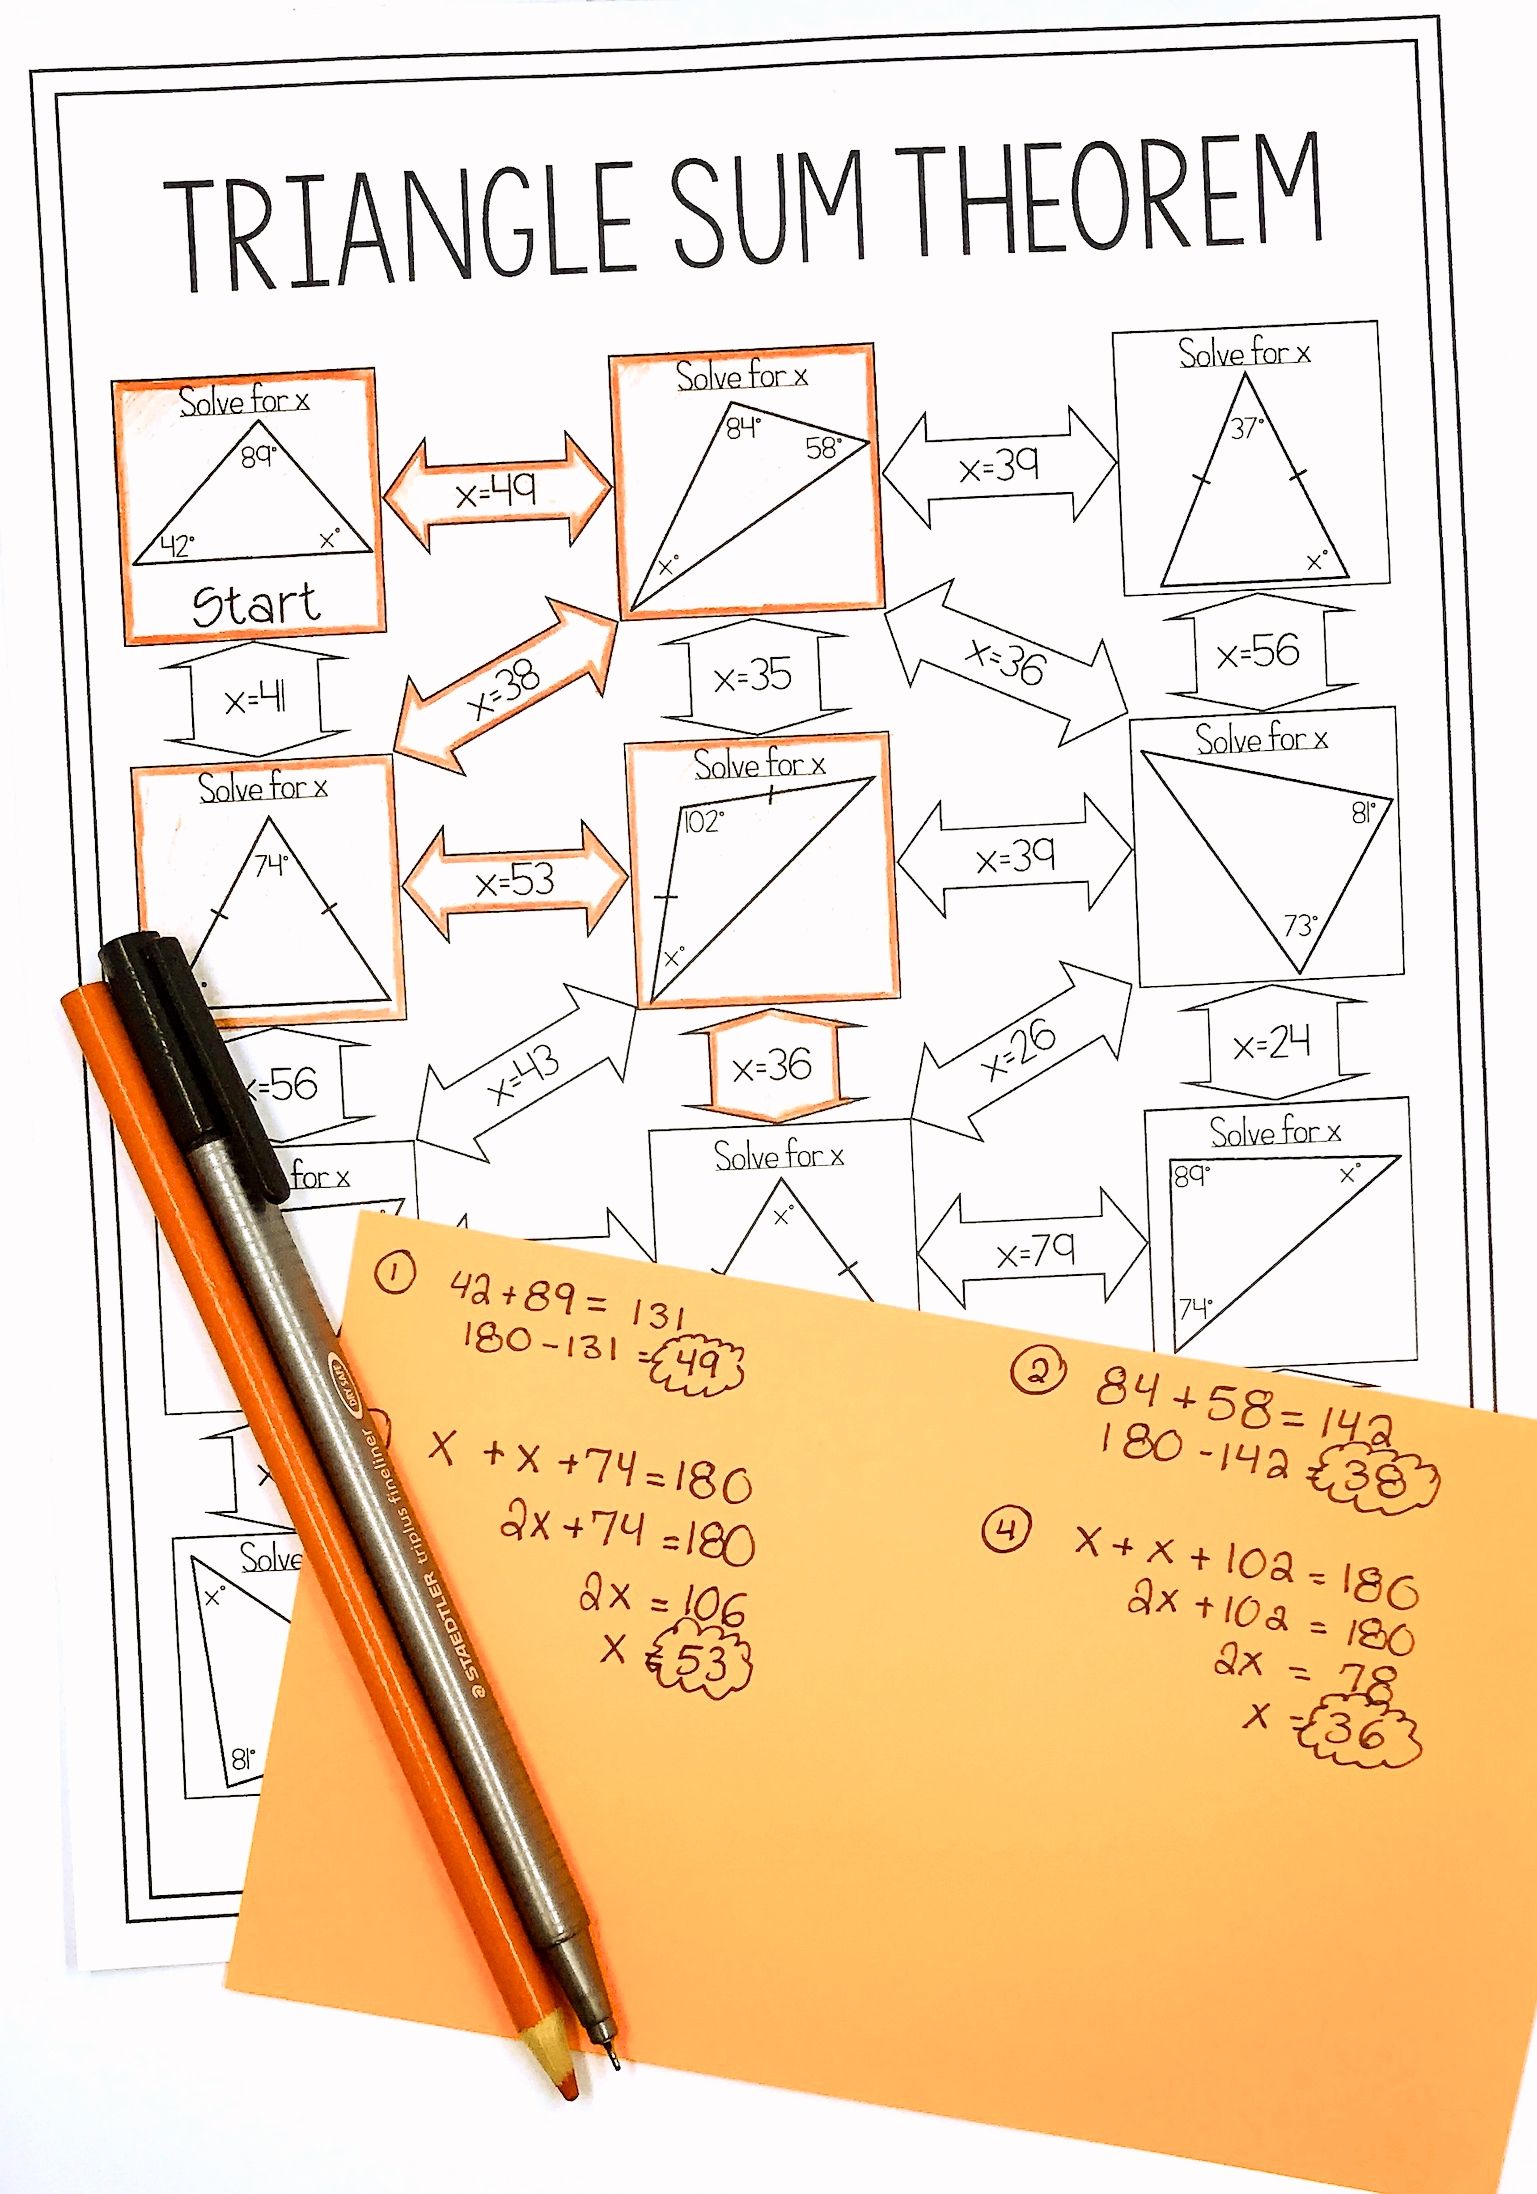 This Triangle Sum Theorem worksheet was the perfect math activity for